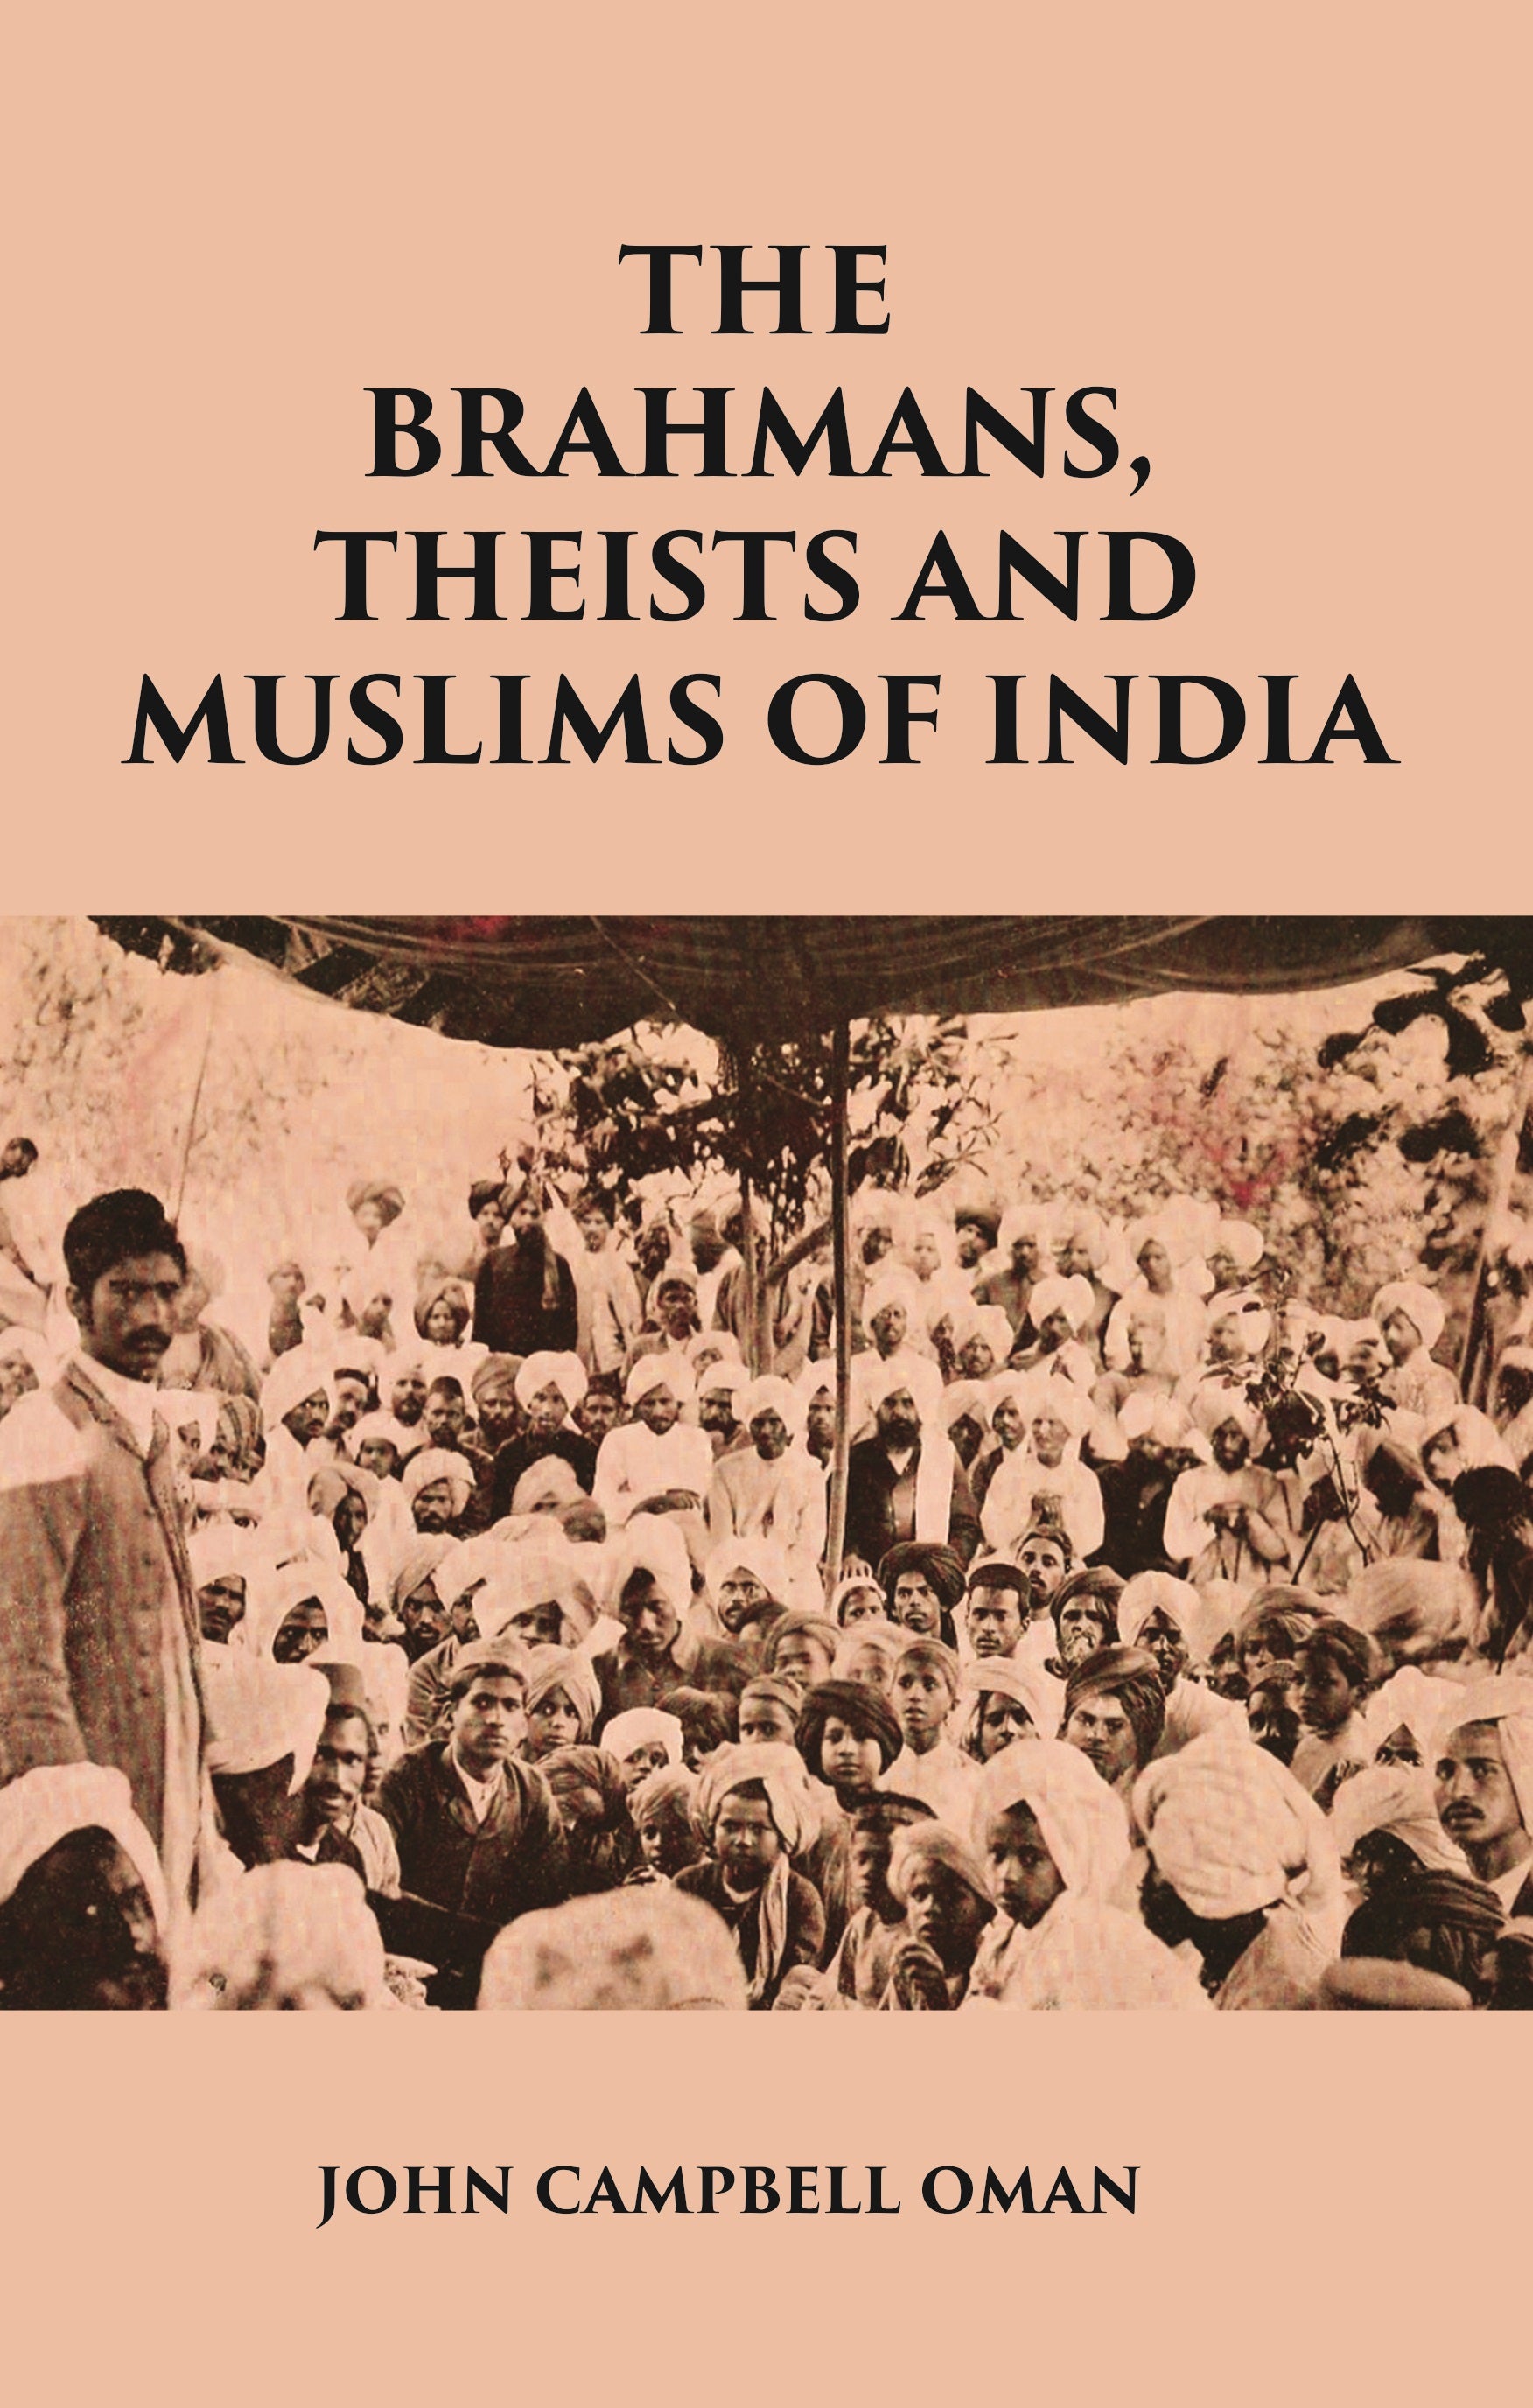 THE BRAHMANS, THEISTS AND MUSLIMS OF INDIA